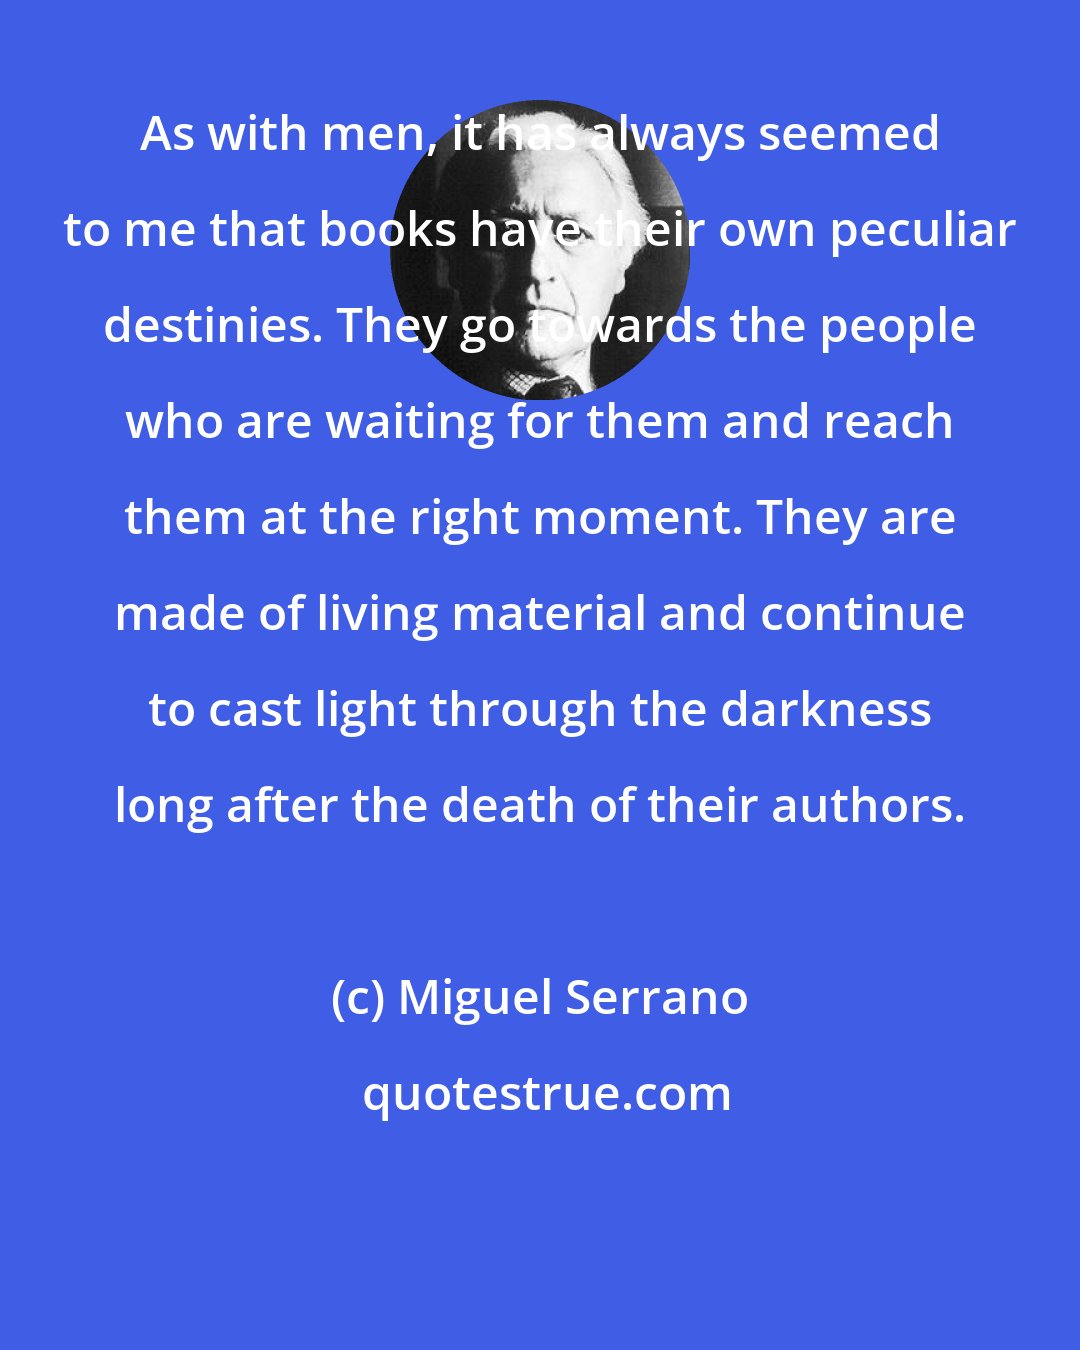 Miguel Serrano: As with men, it has always seemed to me that books have their own peculiar destinies. They go towards the people who are waiting for them and reach them at the right moment. They are made of living material and continue to cast light through the darkness long after the death of their authors.